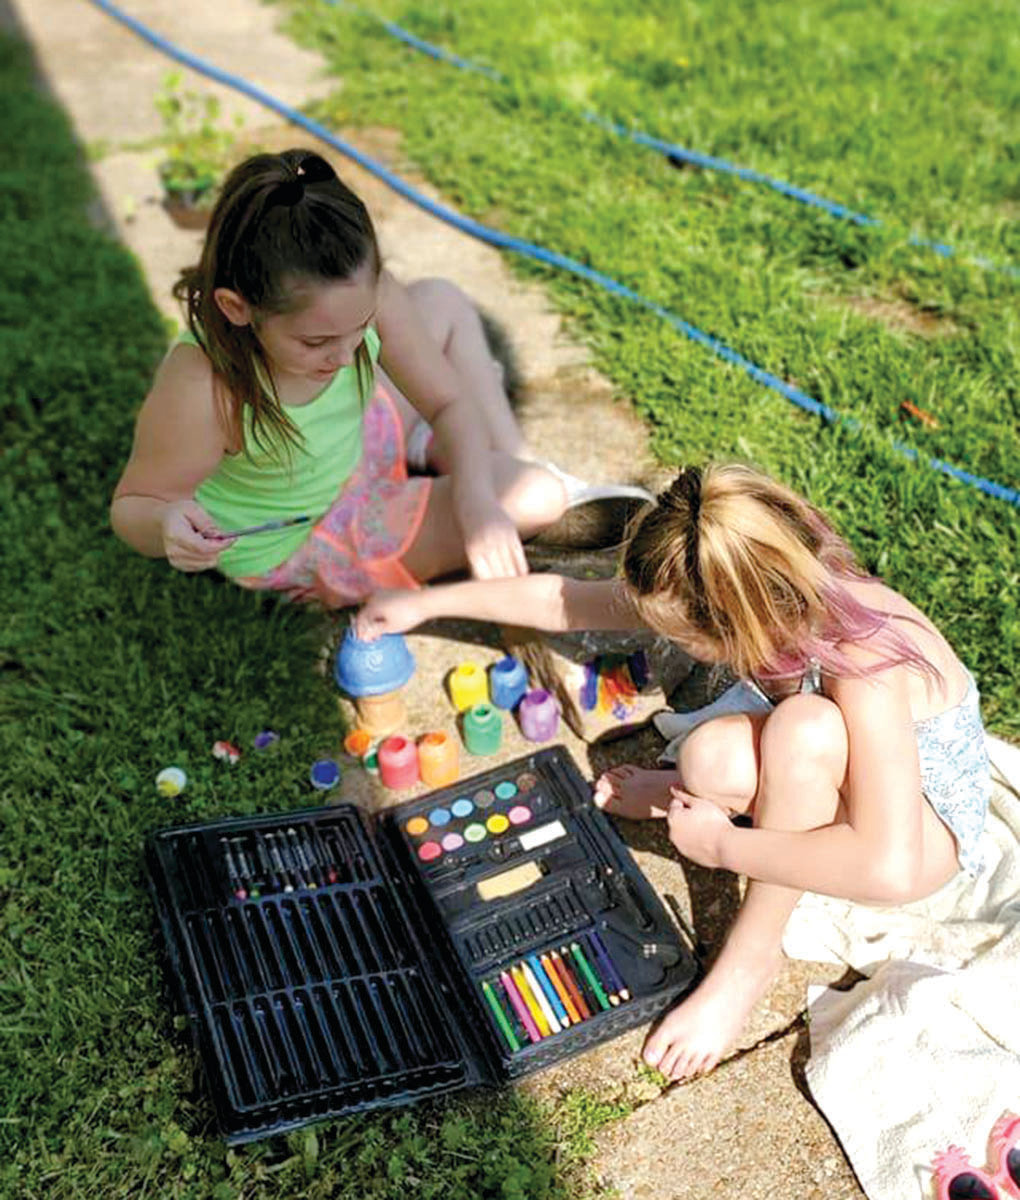 Blaise Deatsch and Kirra Deatsch enjoy time playing with colored chalk.